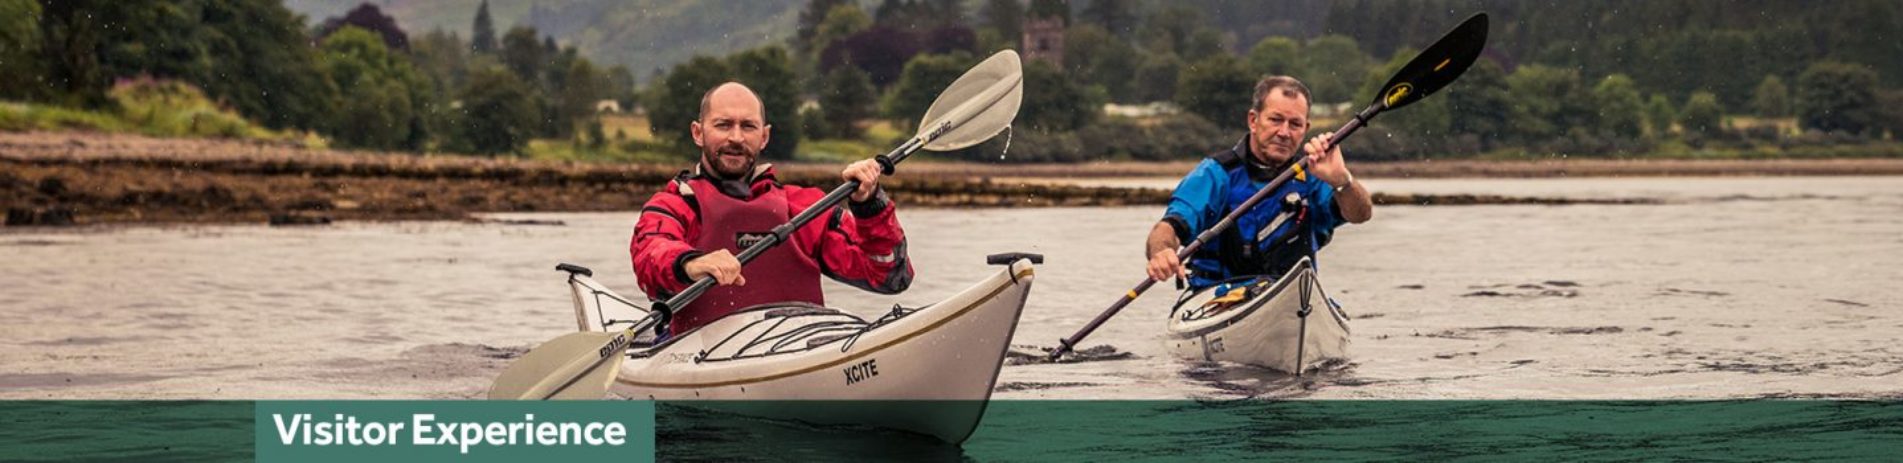 two-men-one-in-red-the-other-in-blue-peddling-in-separate-kayaks-on-loch-long-with-ardentinny-in-the-distance-blue-banner-underneath-reading-visitor-experience